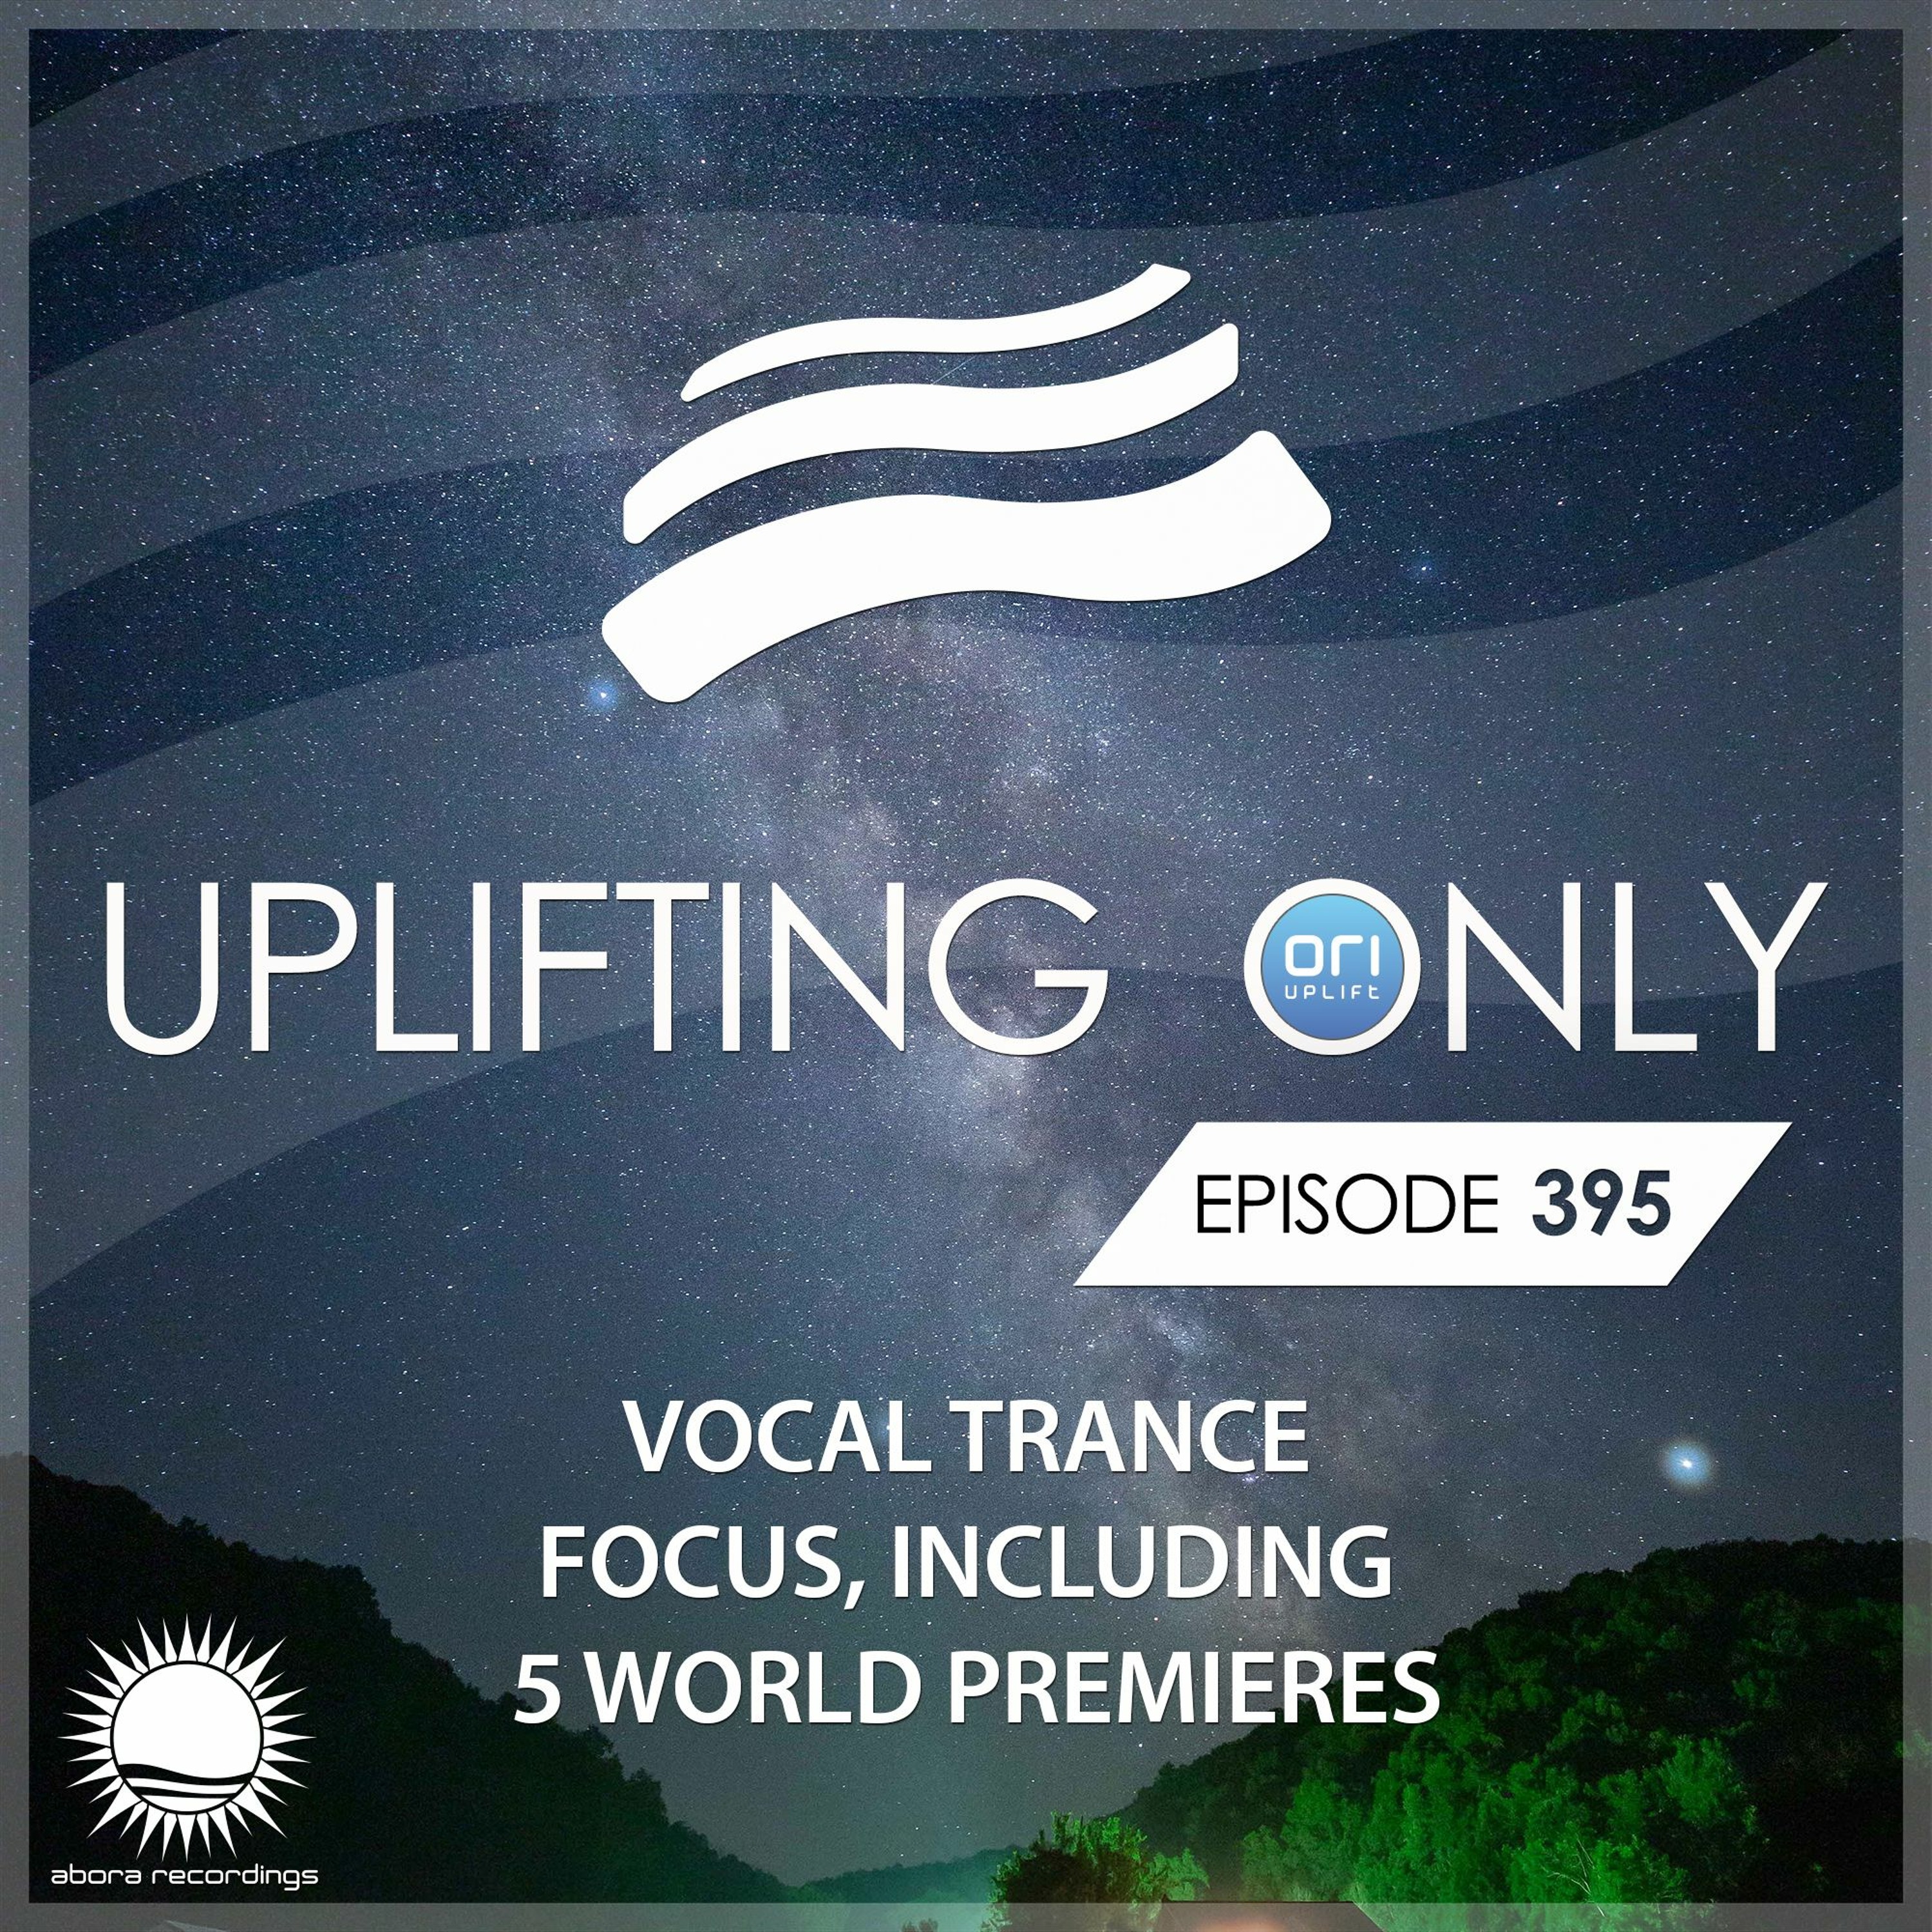 Uplifting Only 395 (Sept 3, 2020) (Vocal Trance Focus)